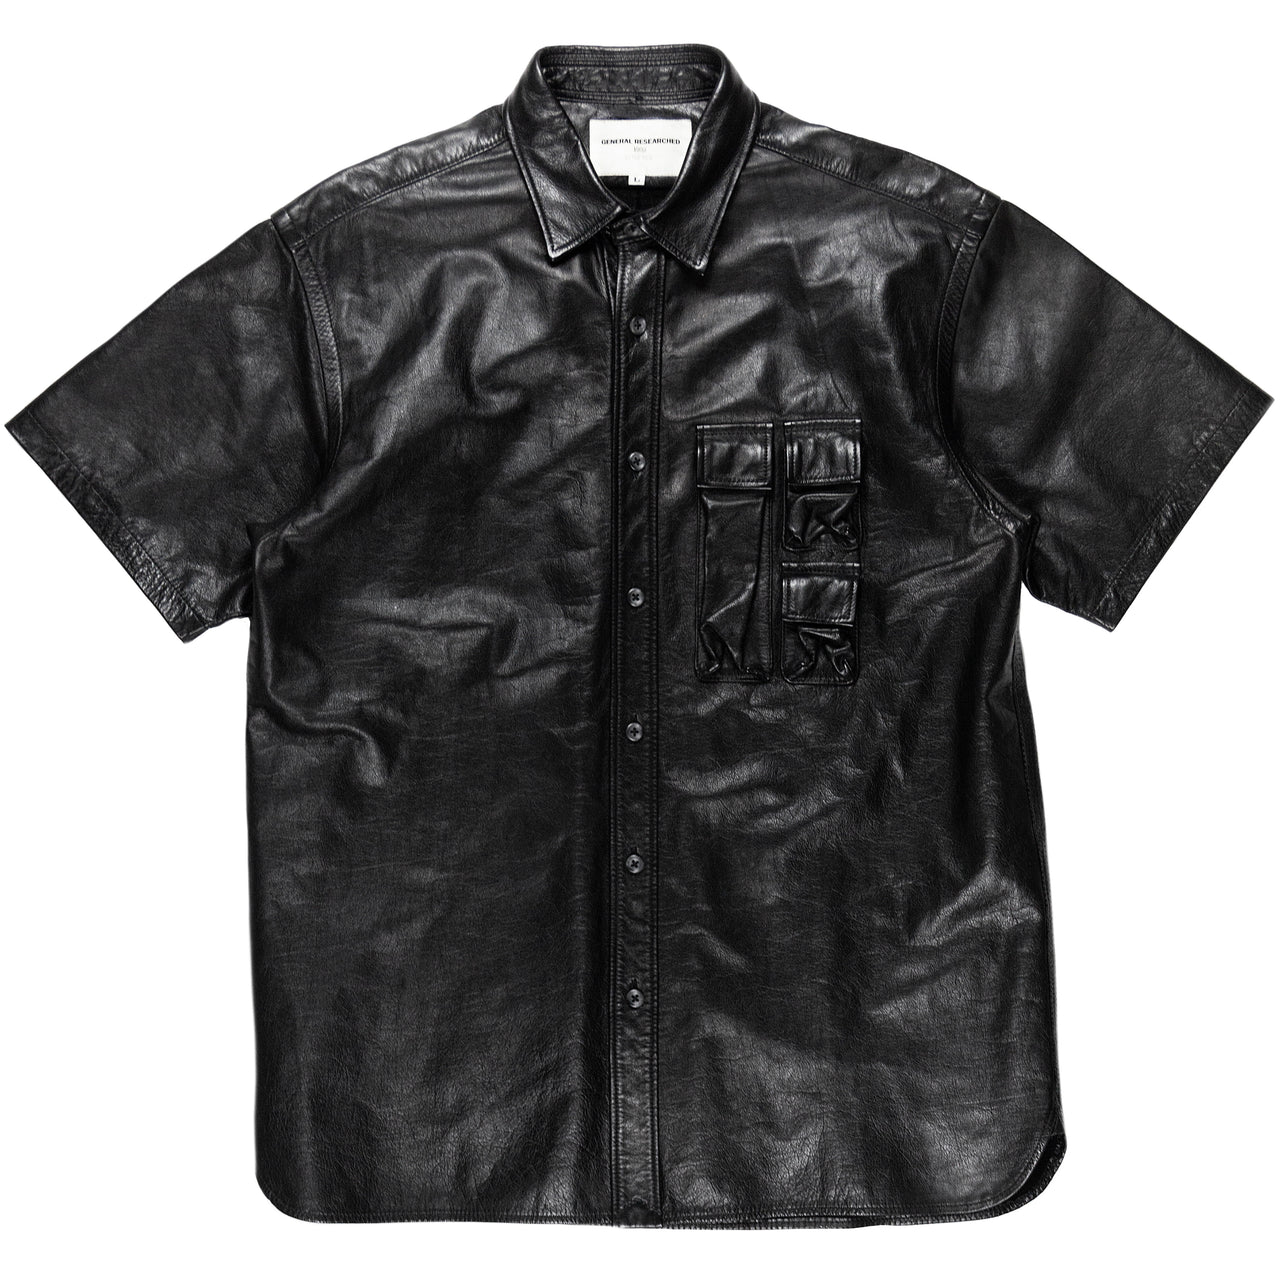 General Research Leather Cargo Pocket Mesh Shirt - 1999